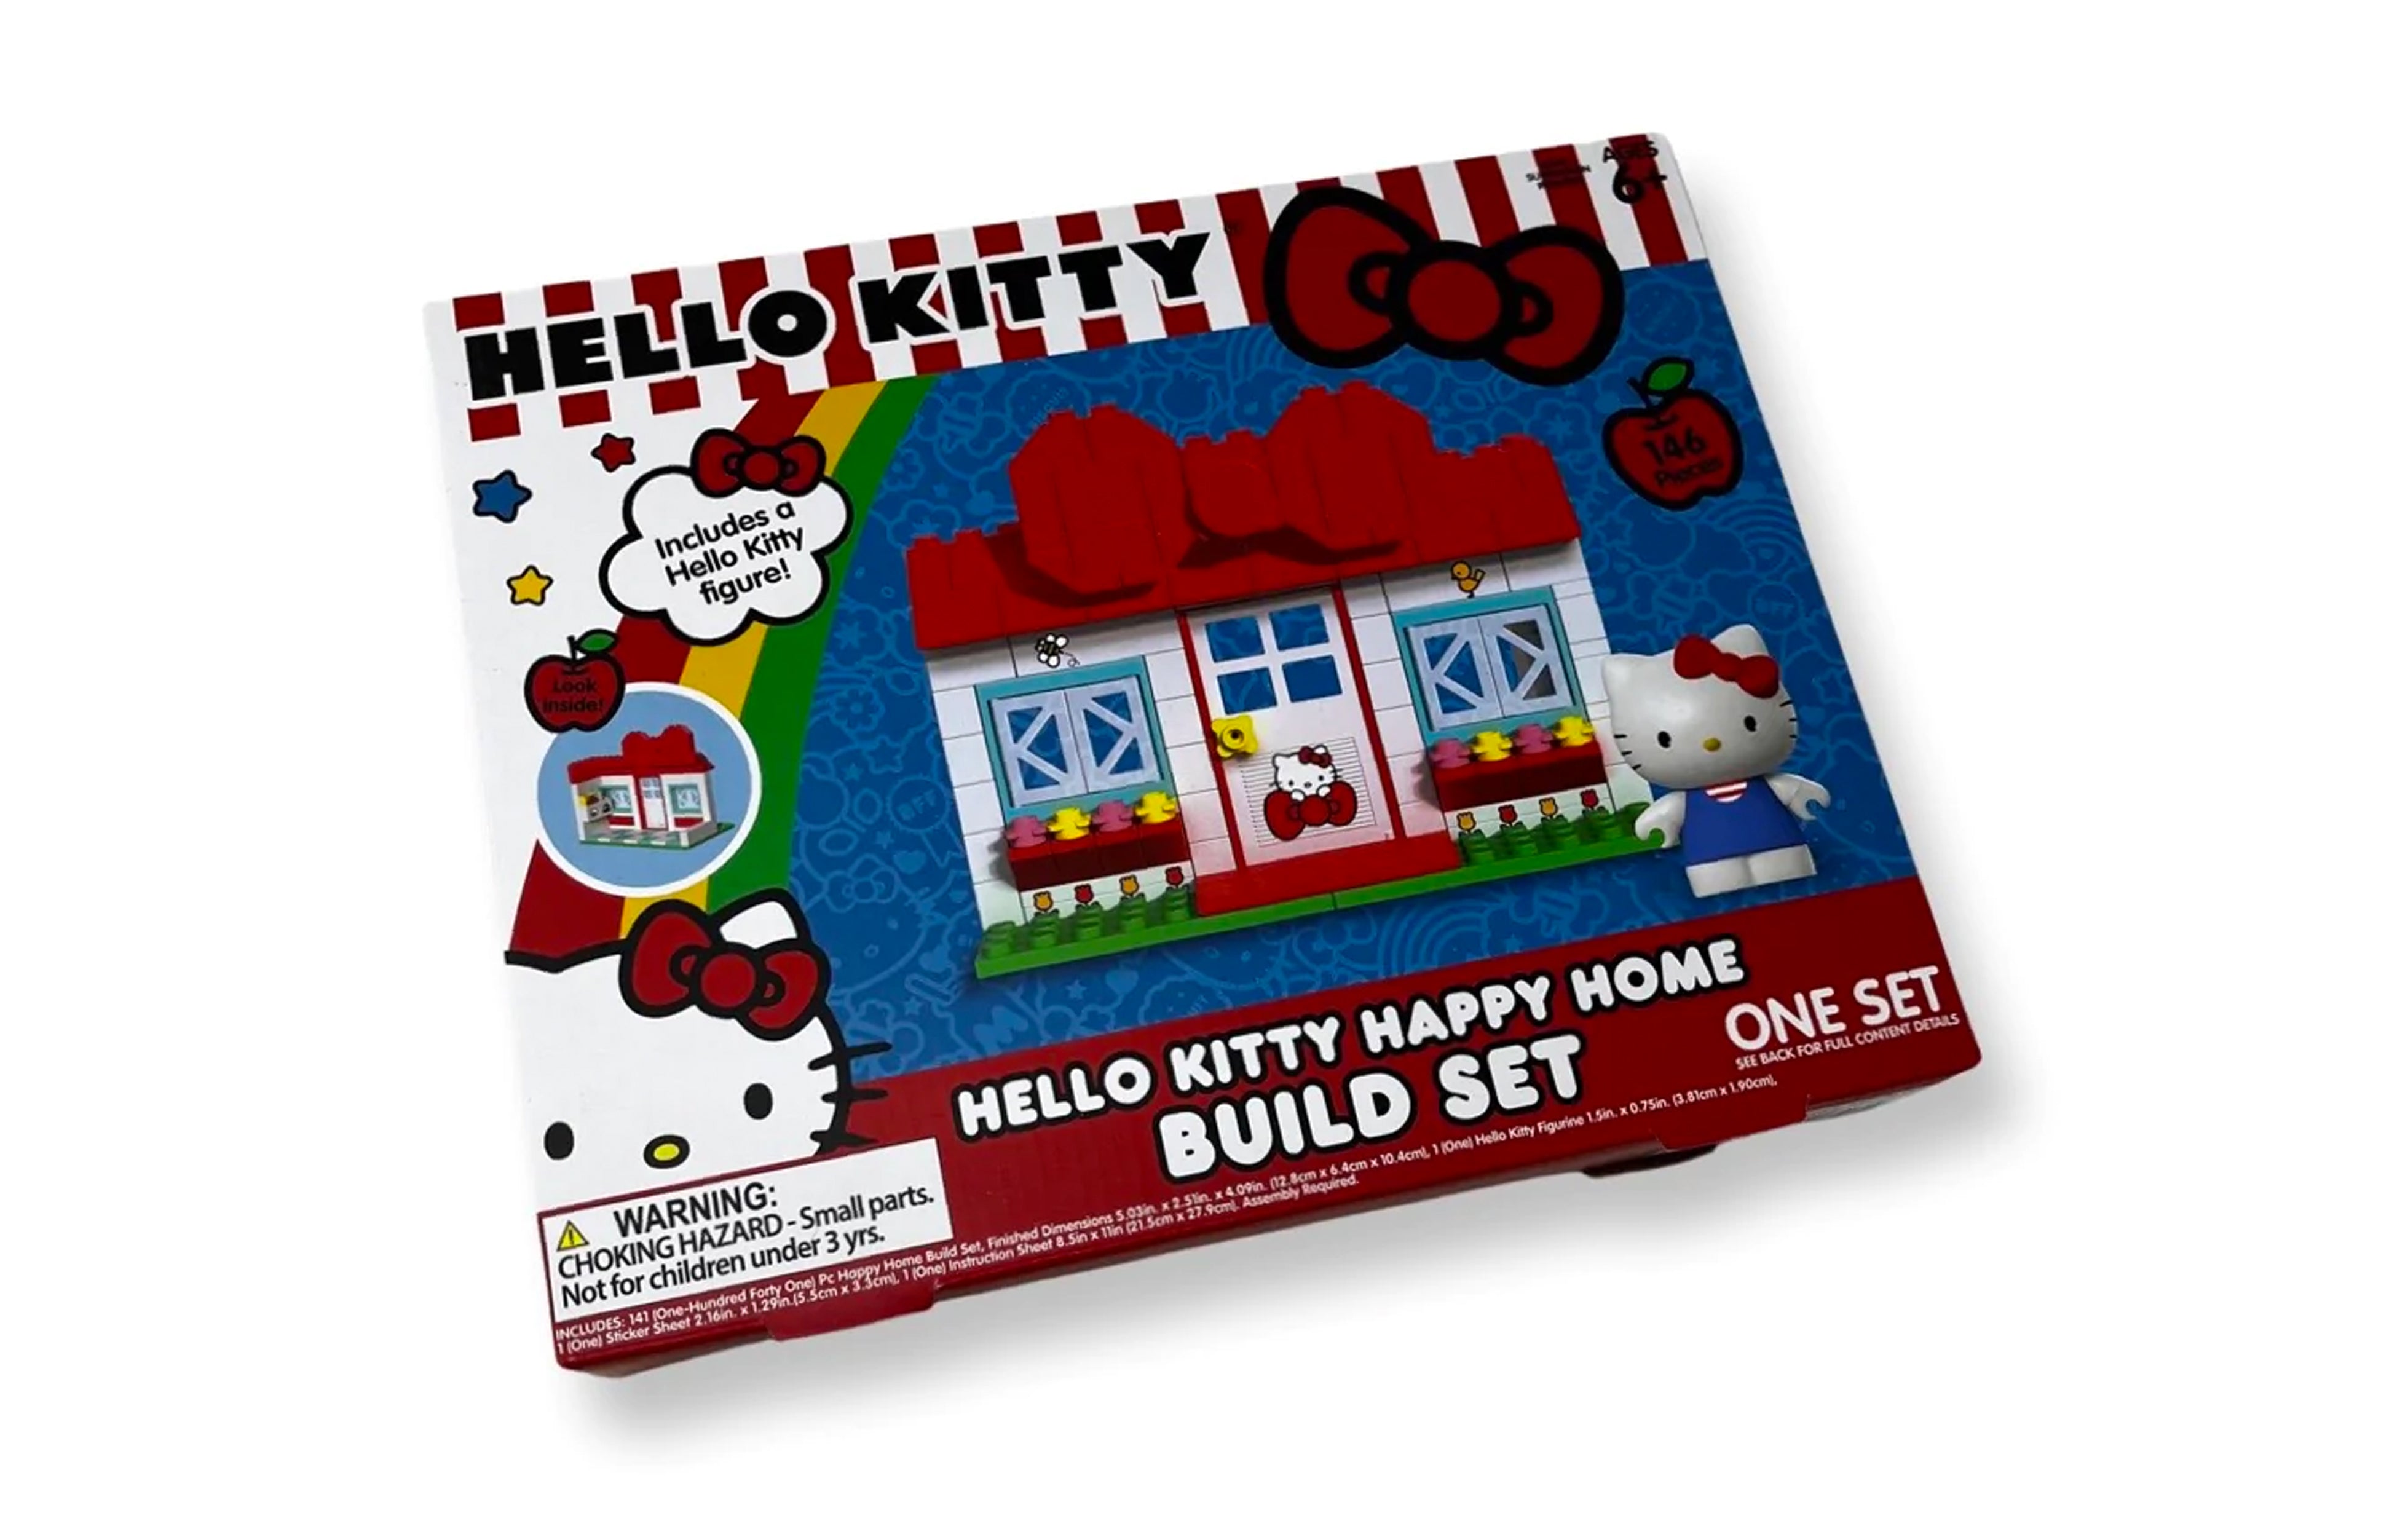 Happy Home Build Set by Hello Kitty - Galerie F